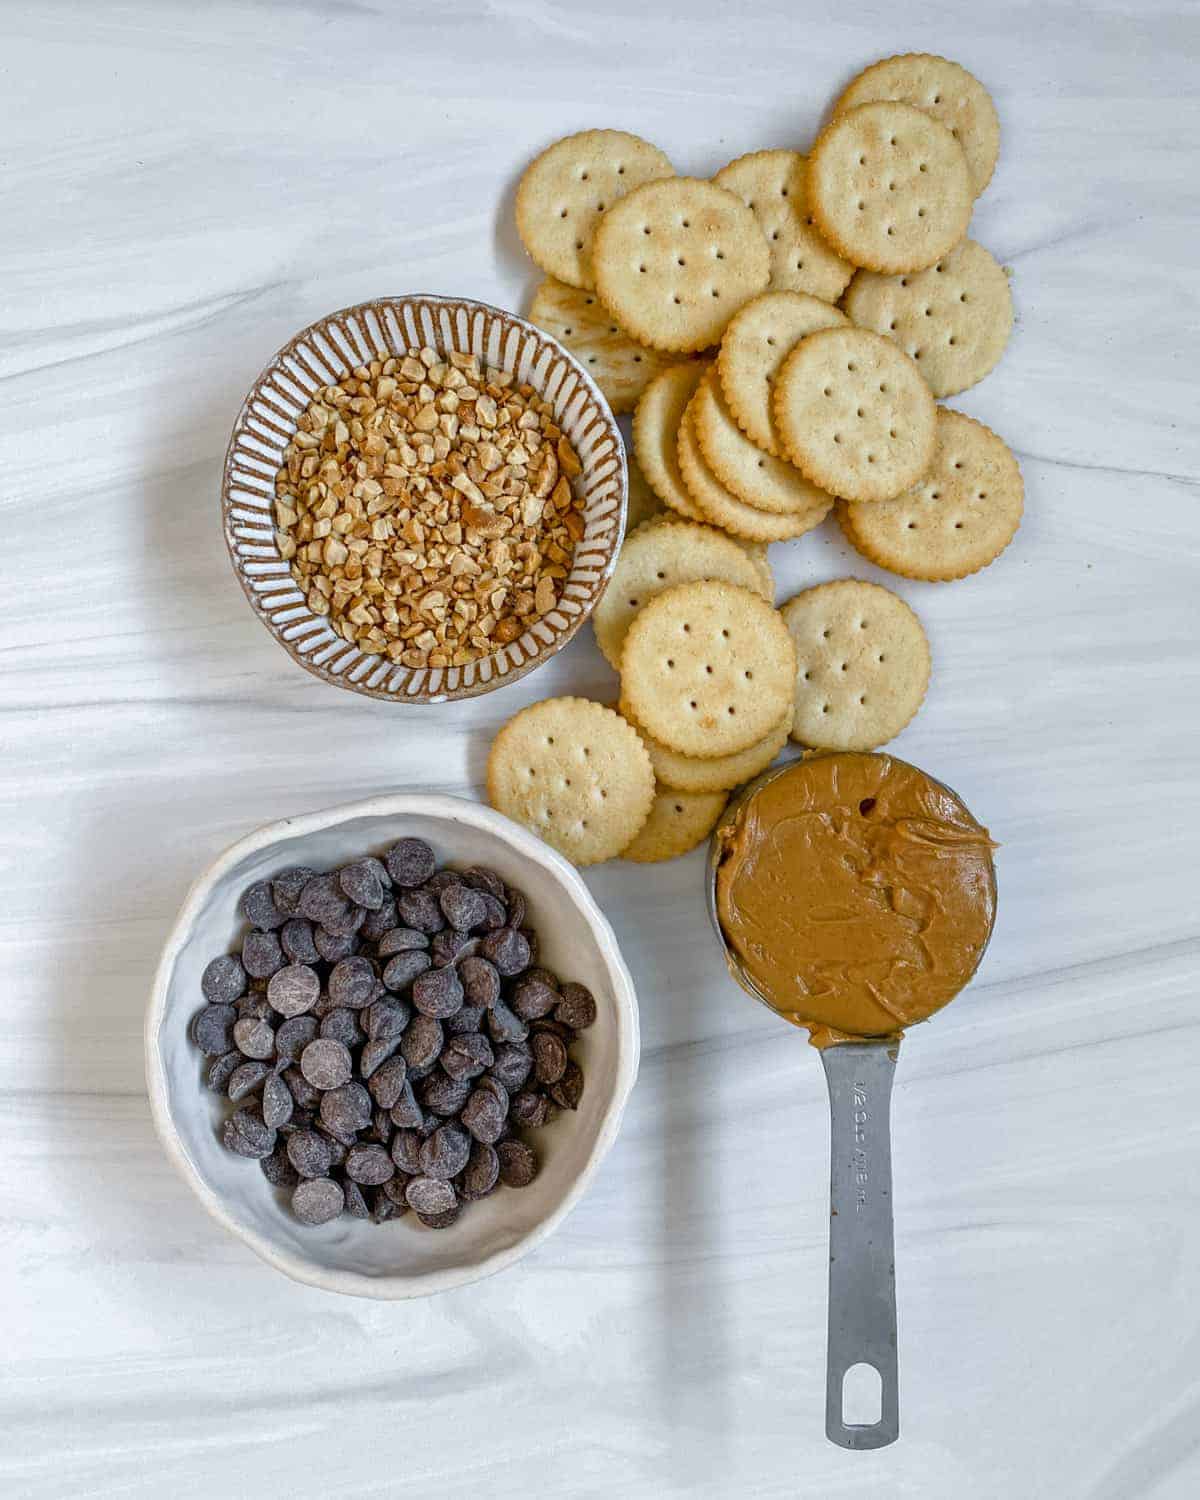 ingredients for Peanut Butter Cracker Sandwiches against a white surface